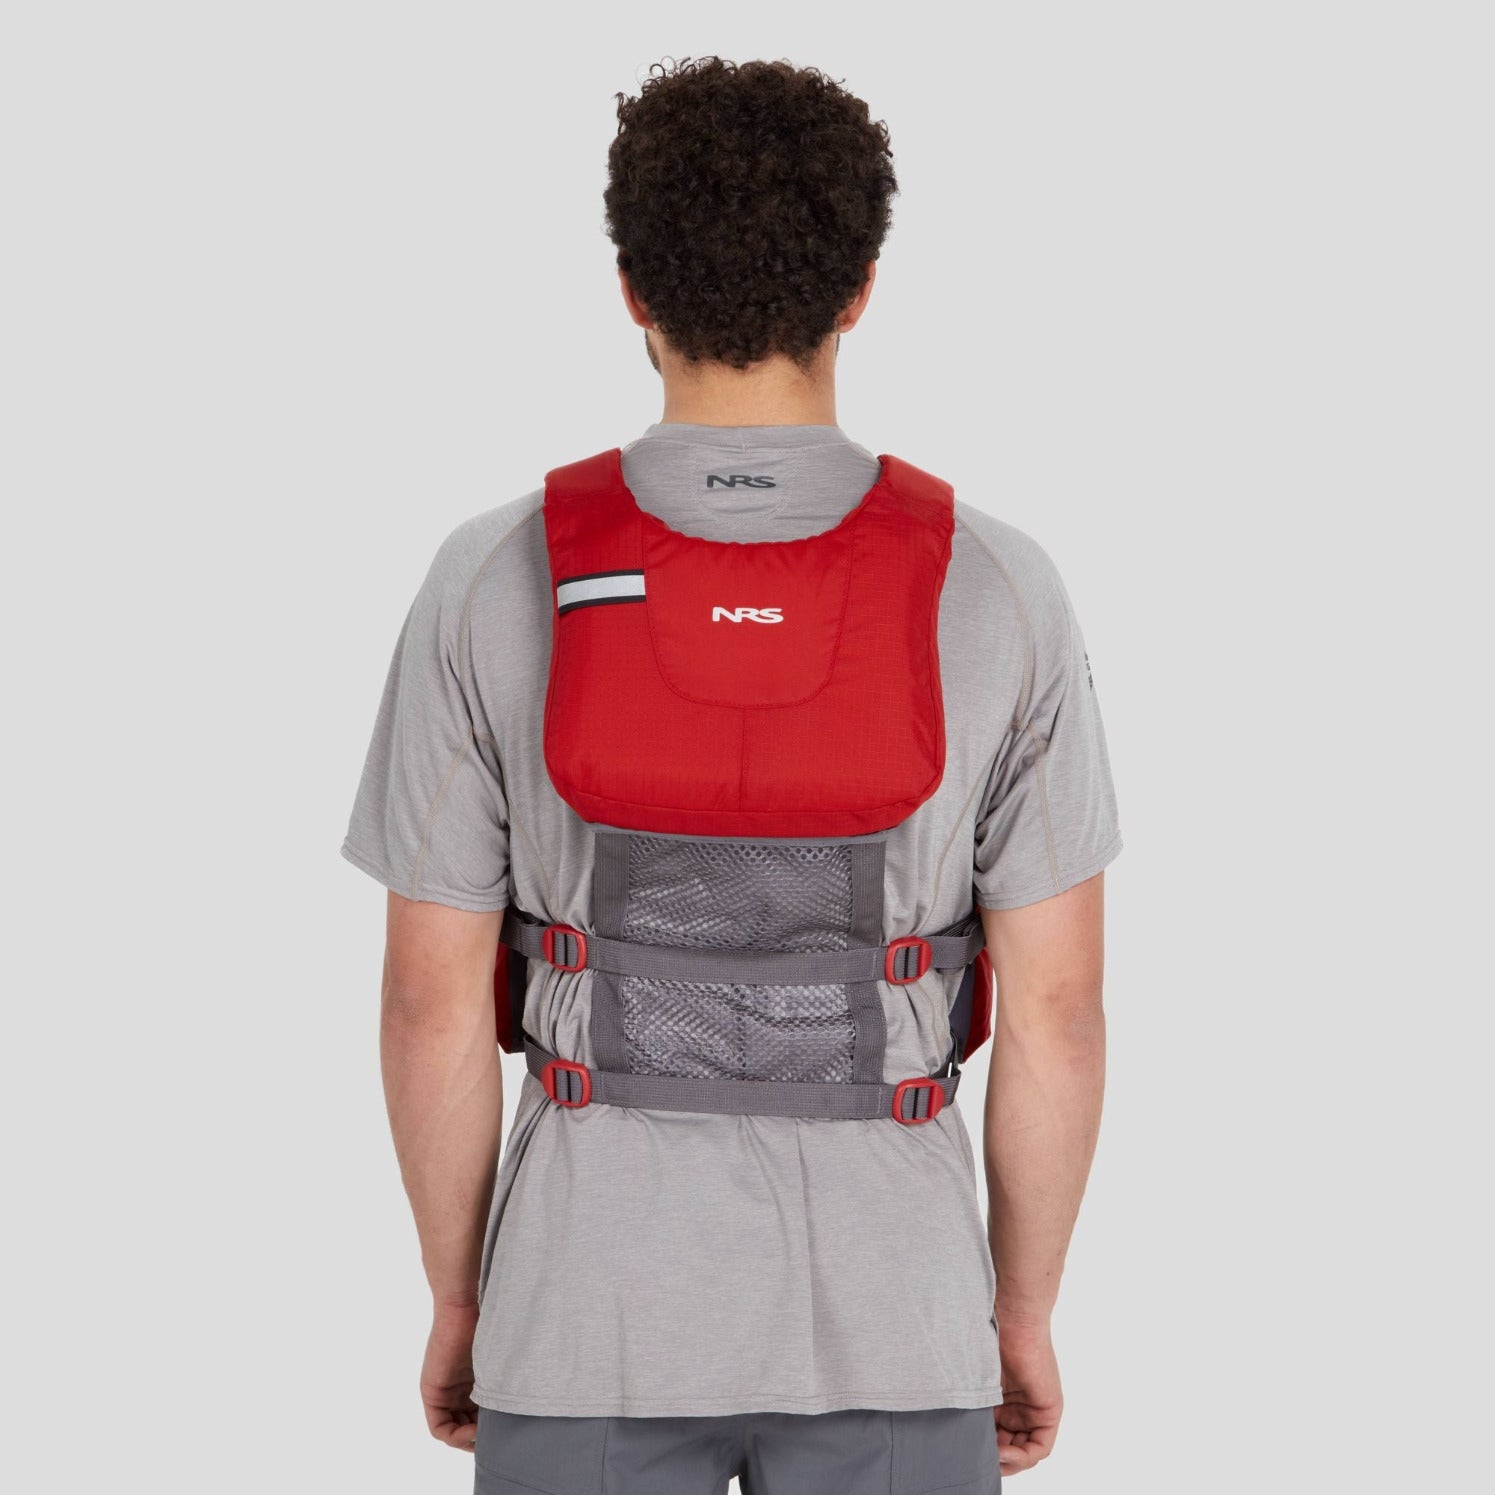 NRS Clearwater PFDs with high back design